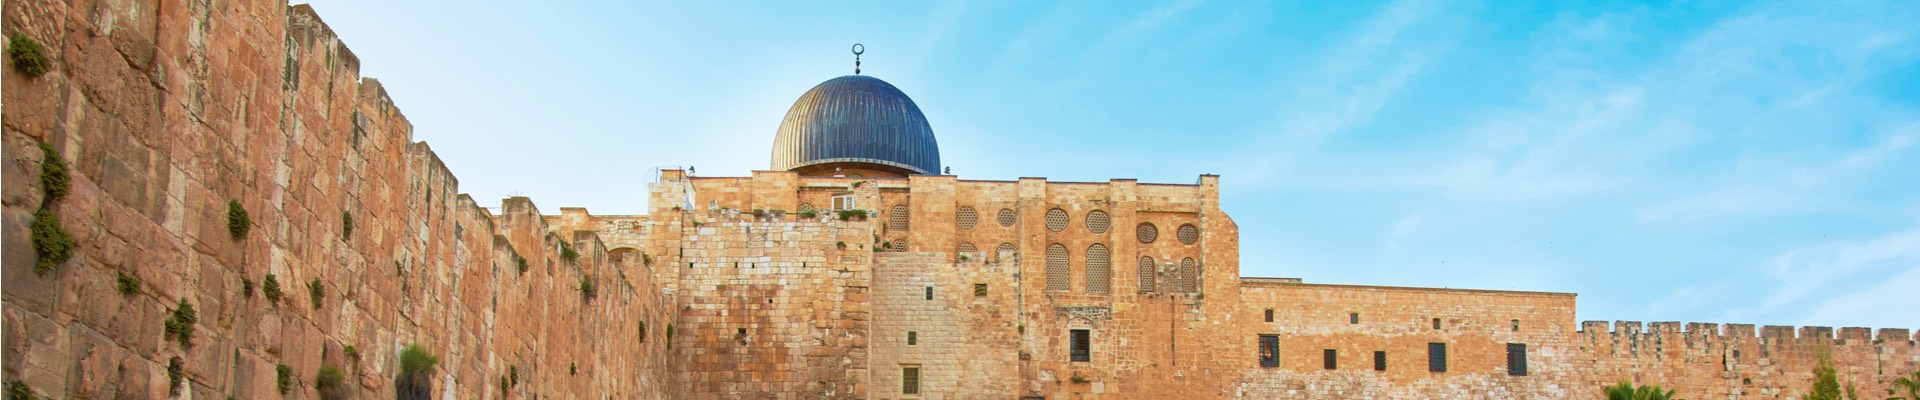 11 Day Jewish Heritage Israel Tour - Small Group Tour